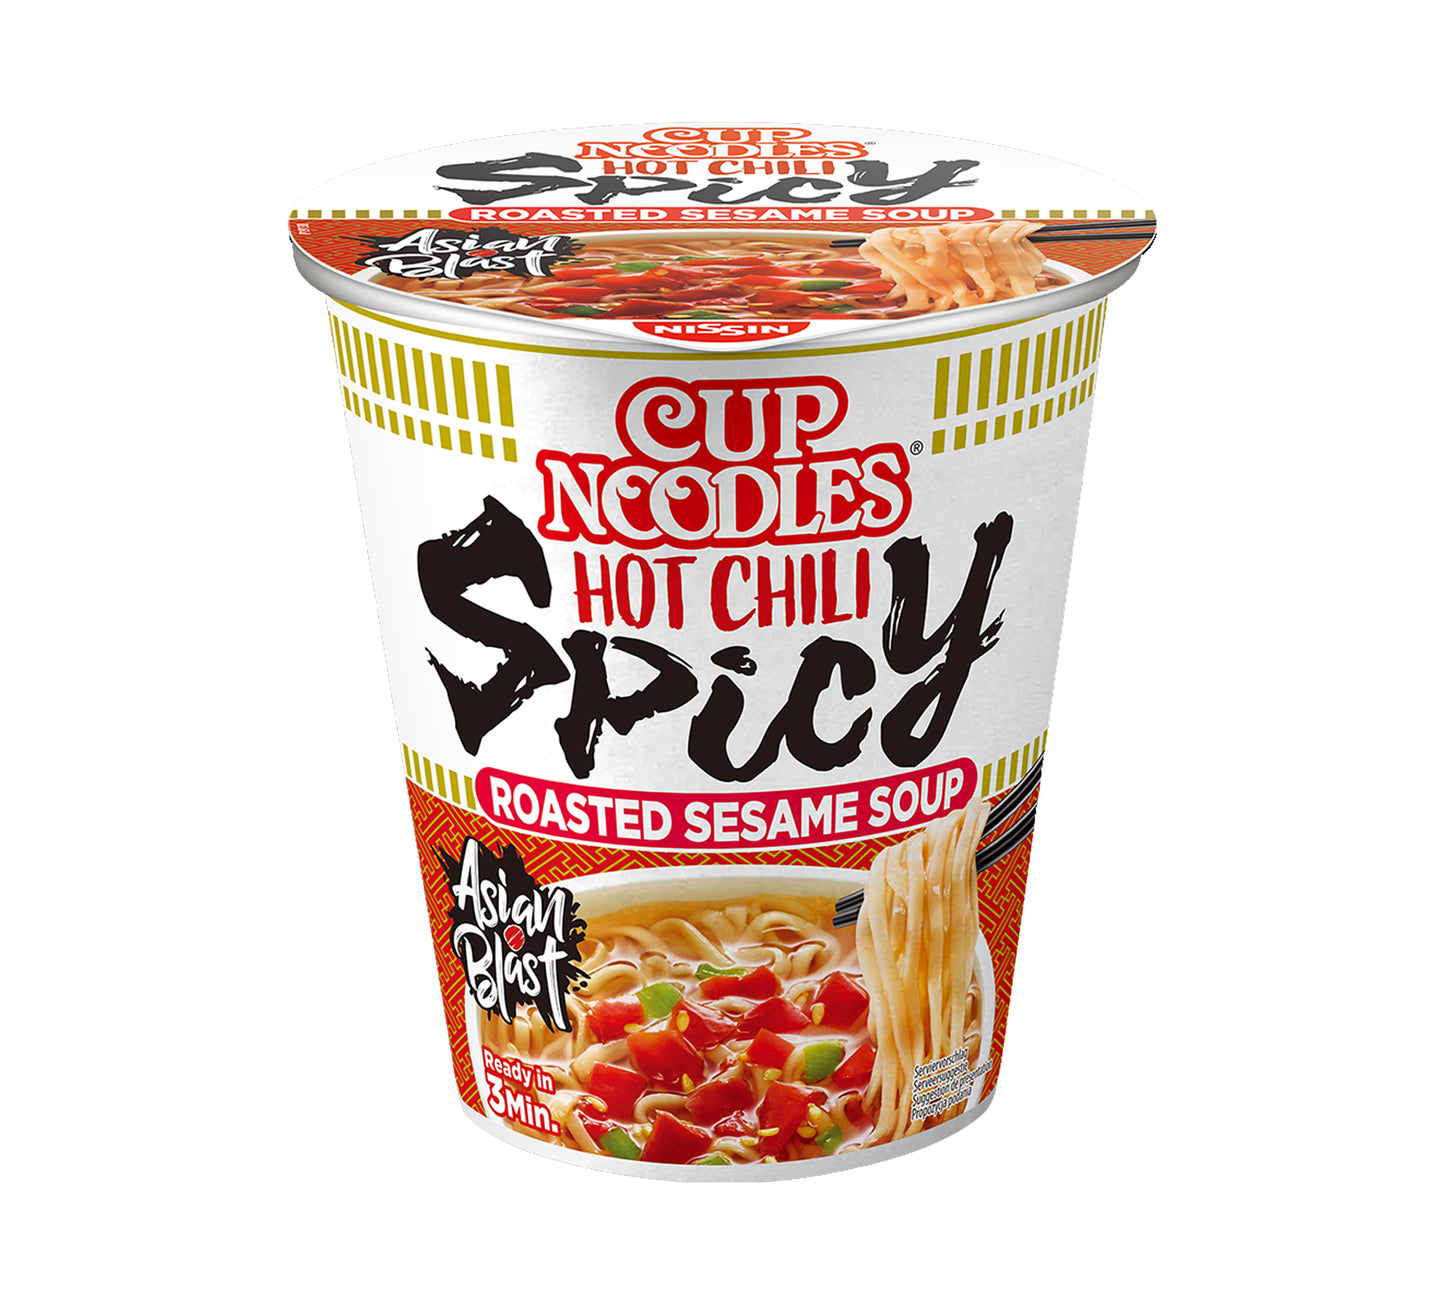 Nissin Cup Noodles Hot Chili Spicy Roasted Sesame Soup - Multi Pack (8 x 66 gr)